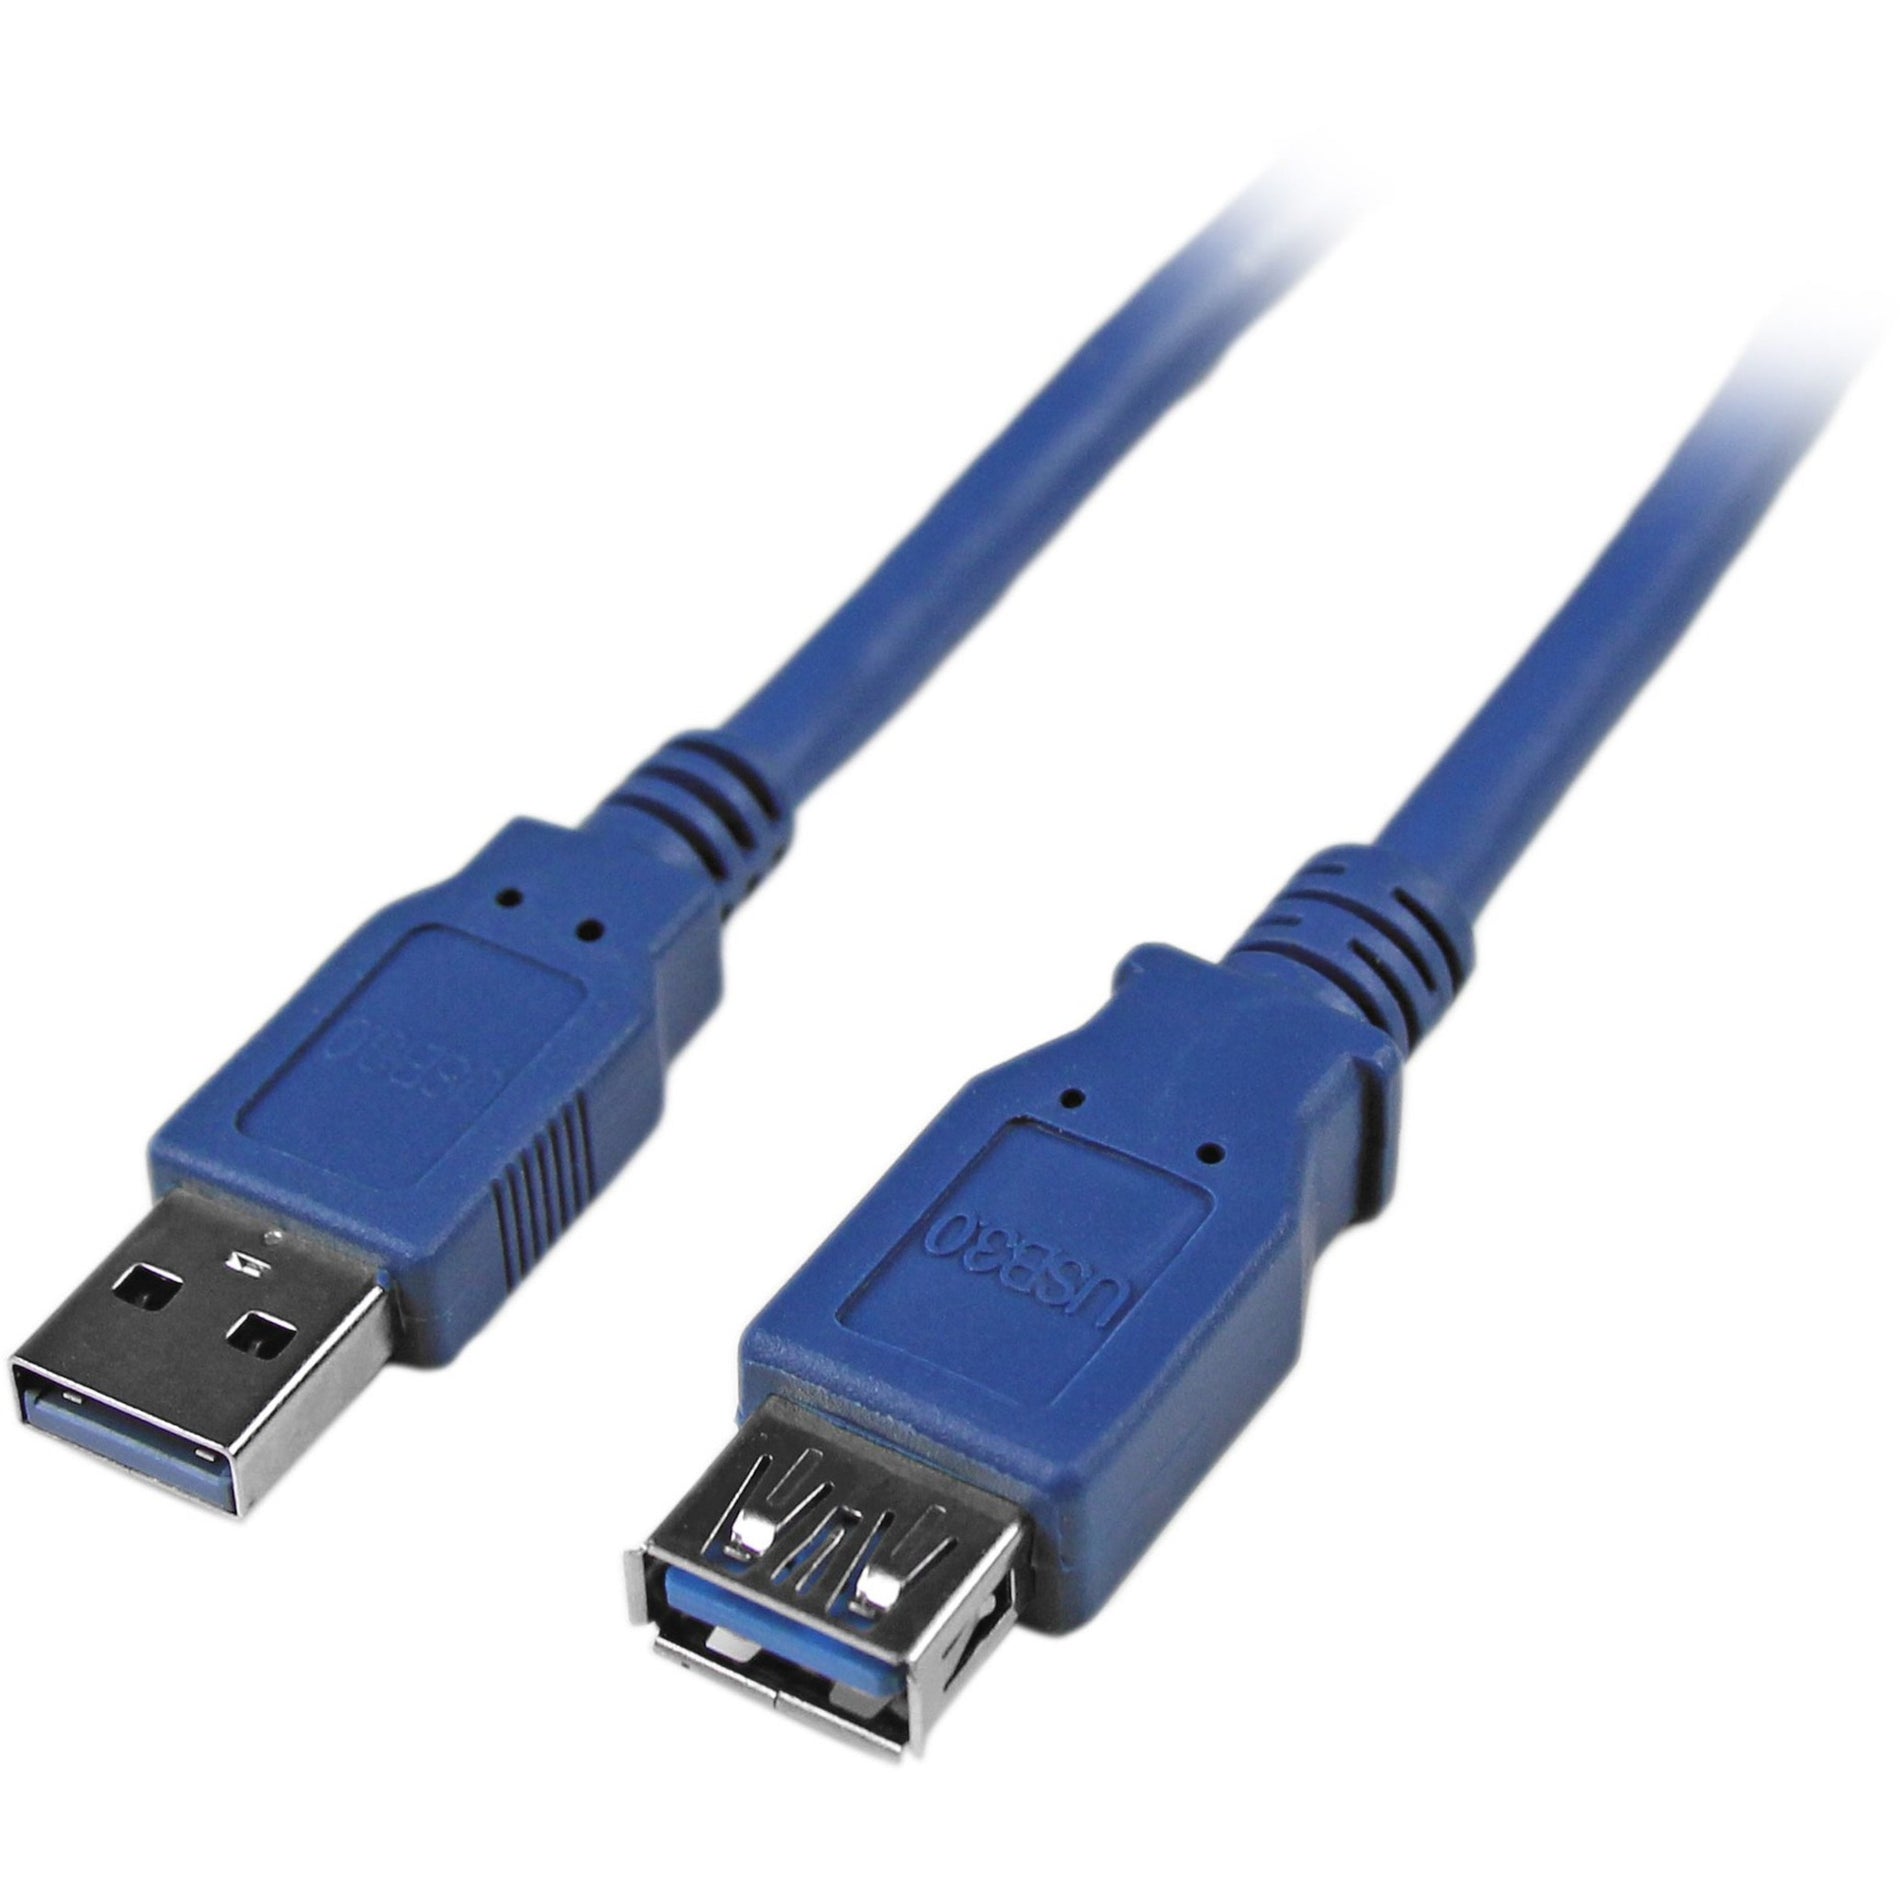 StarTech.com USB3SEXTAA6 6 ft SuperSpeed USB 3.0 Extension Cable A to A M/F, EMI Protection, 5 Gbit/s Data Transfer Rate, Blue